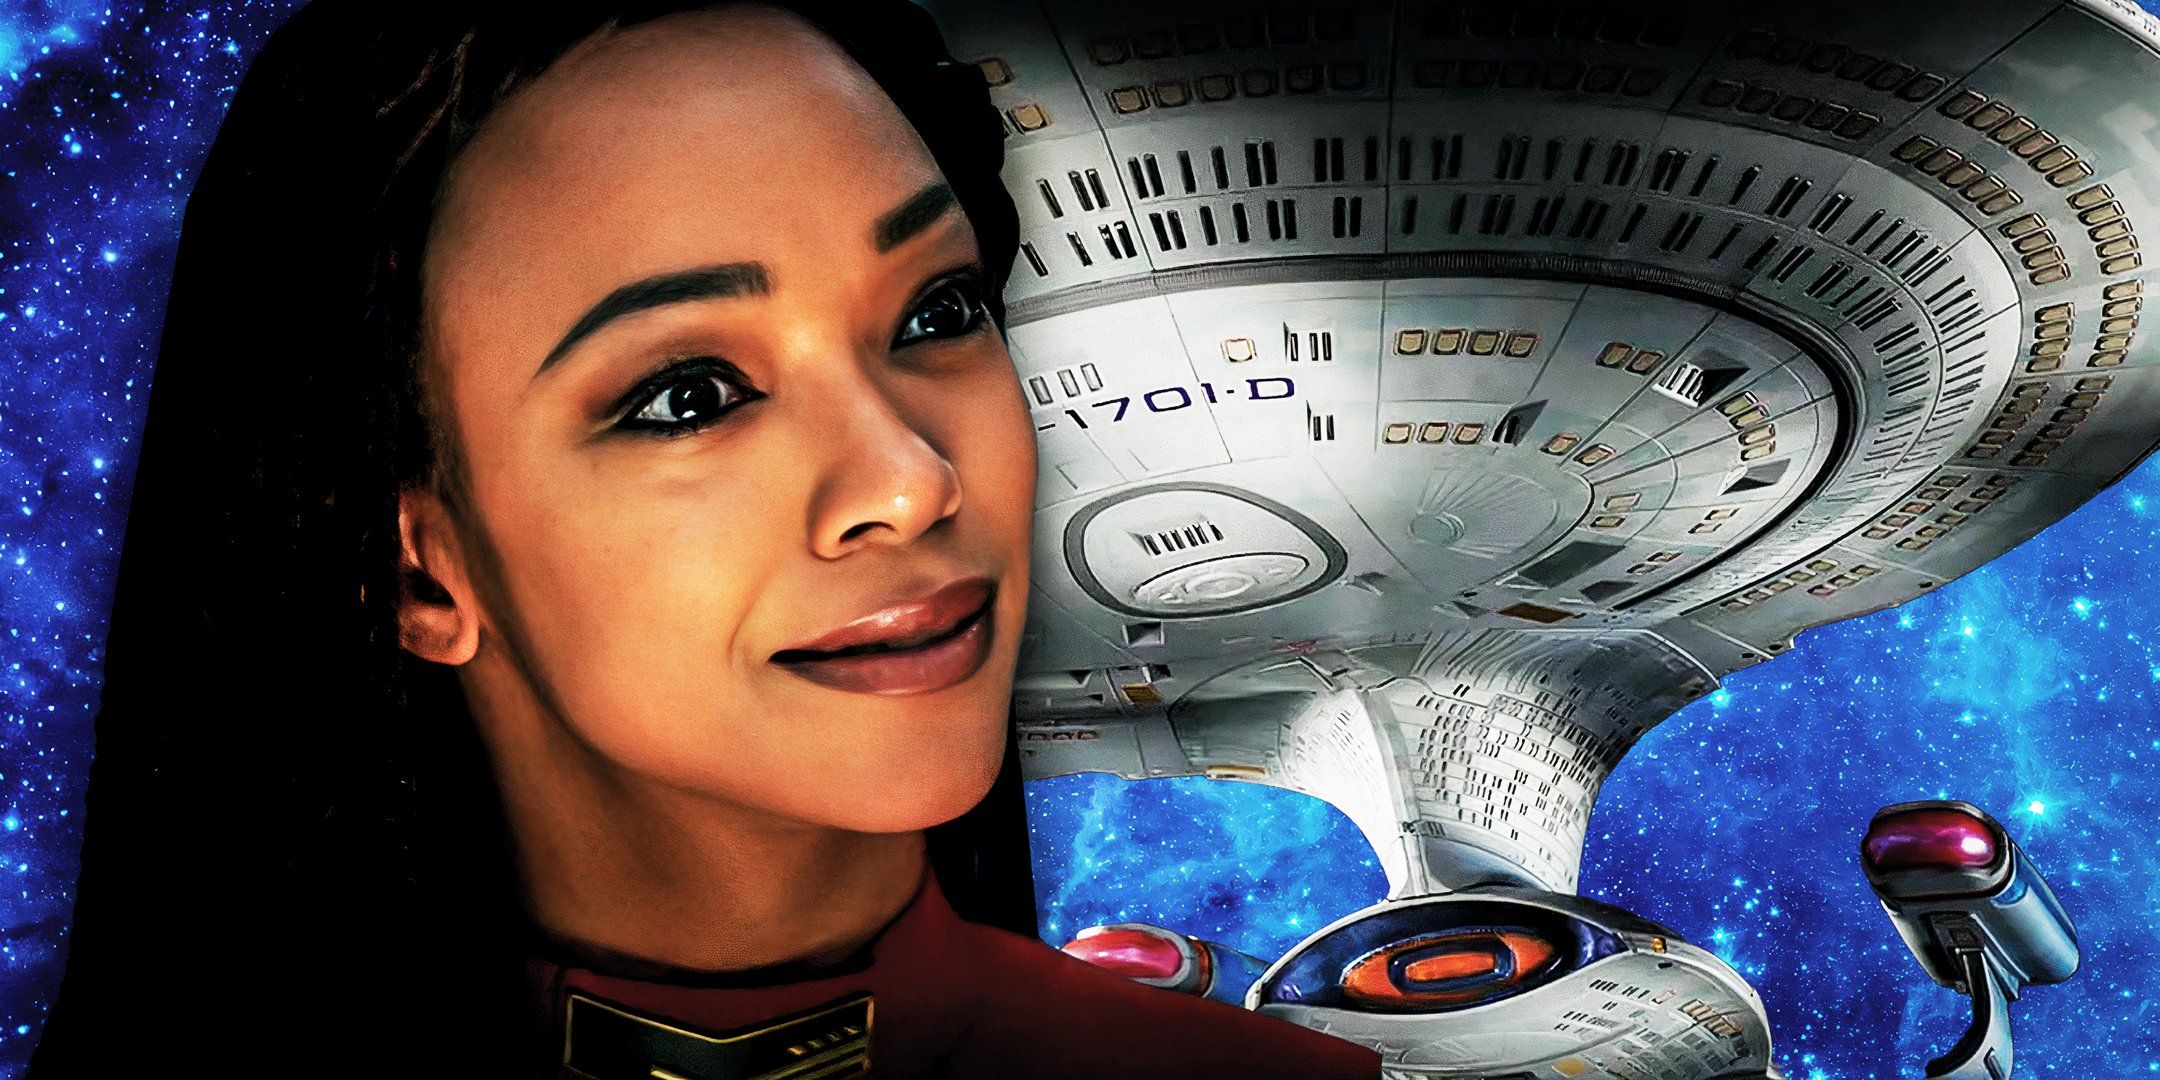 A collage of Captain Michael Burnham (Sonequa Martin-Green) fro Star Trek: Discovery with the USS Enterprise-D from Star Trek: TNG in the background.